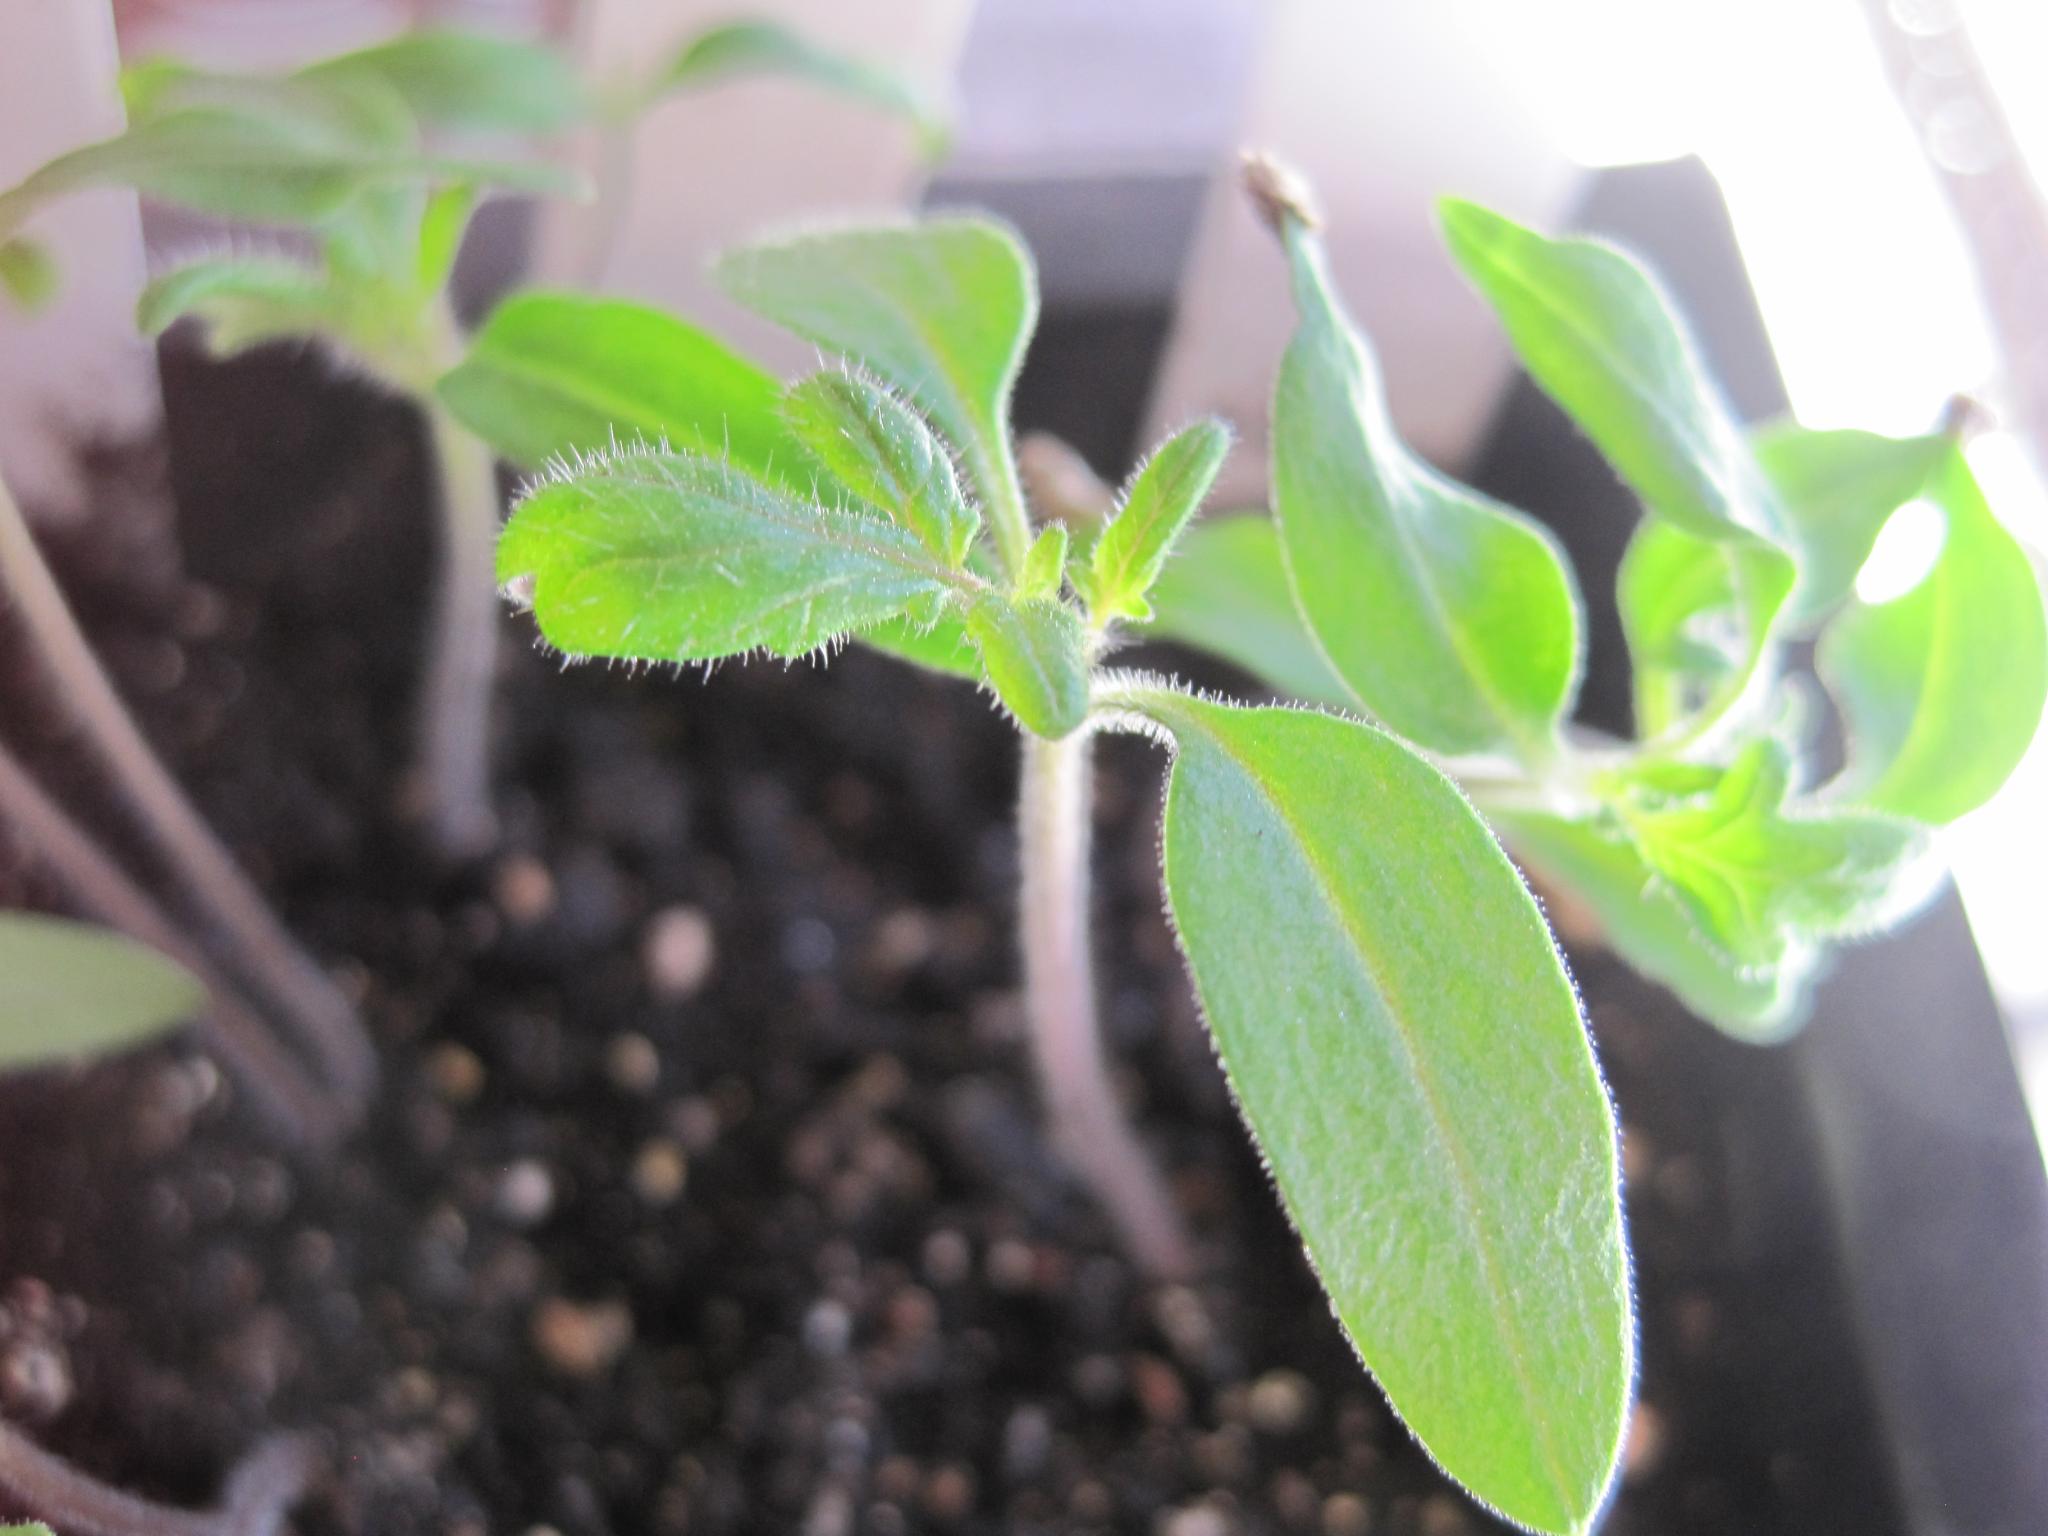 The first leaves are little solar collectors. Get them into the light as soon as possible.